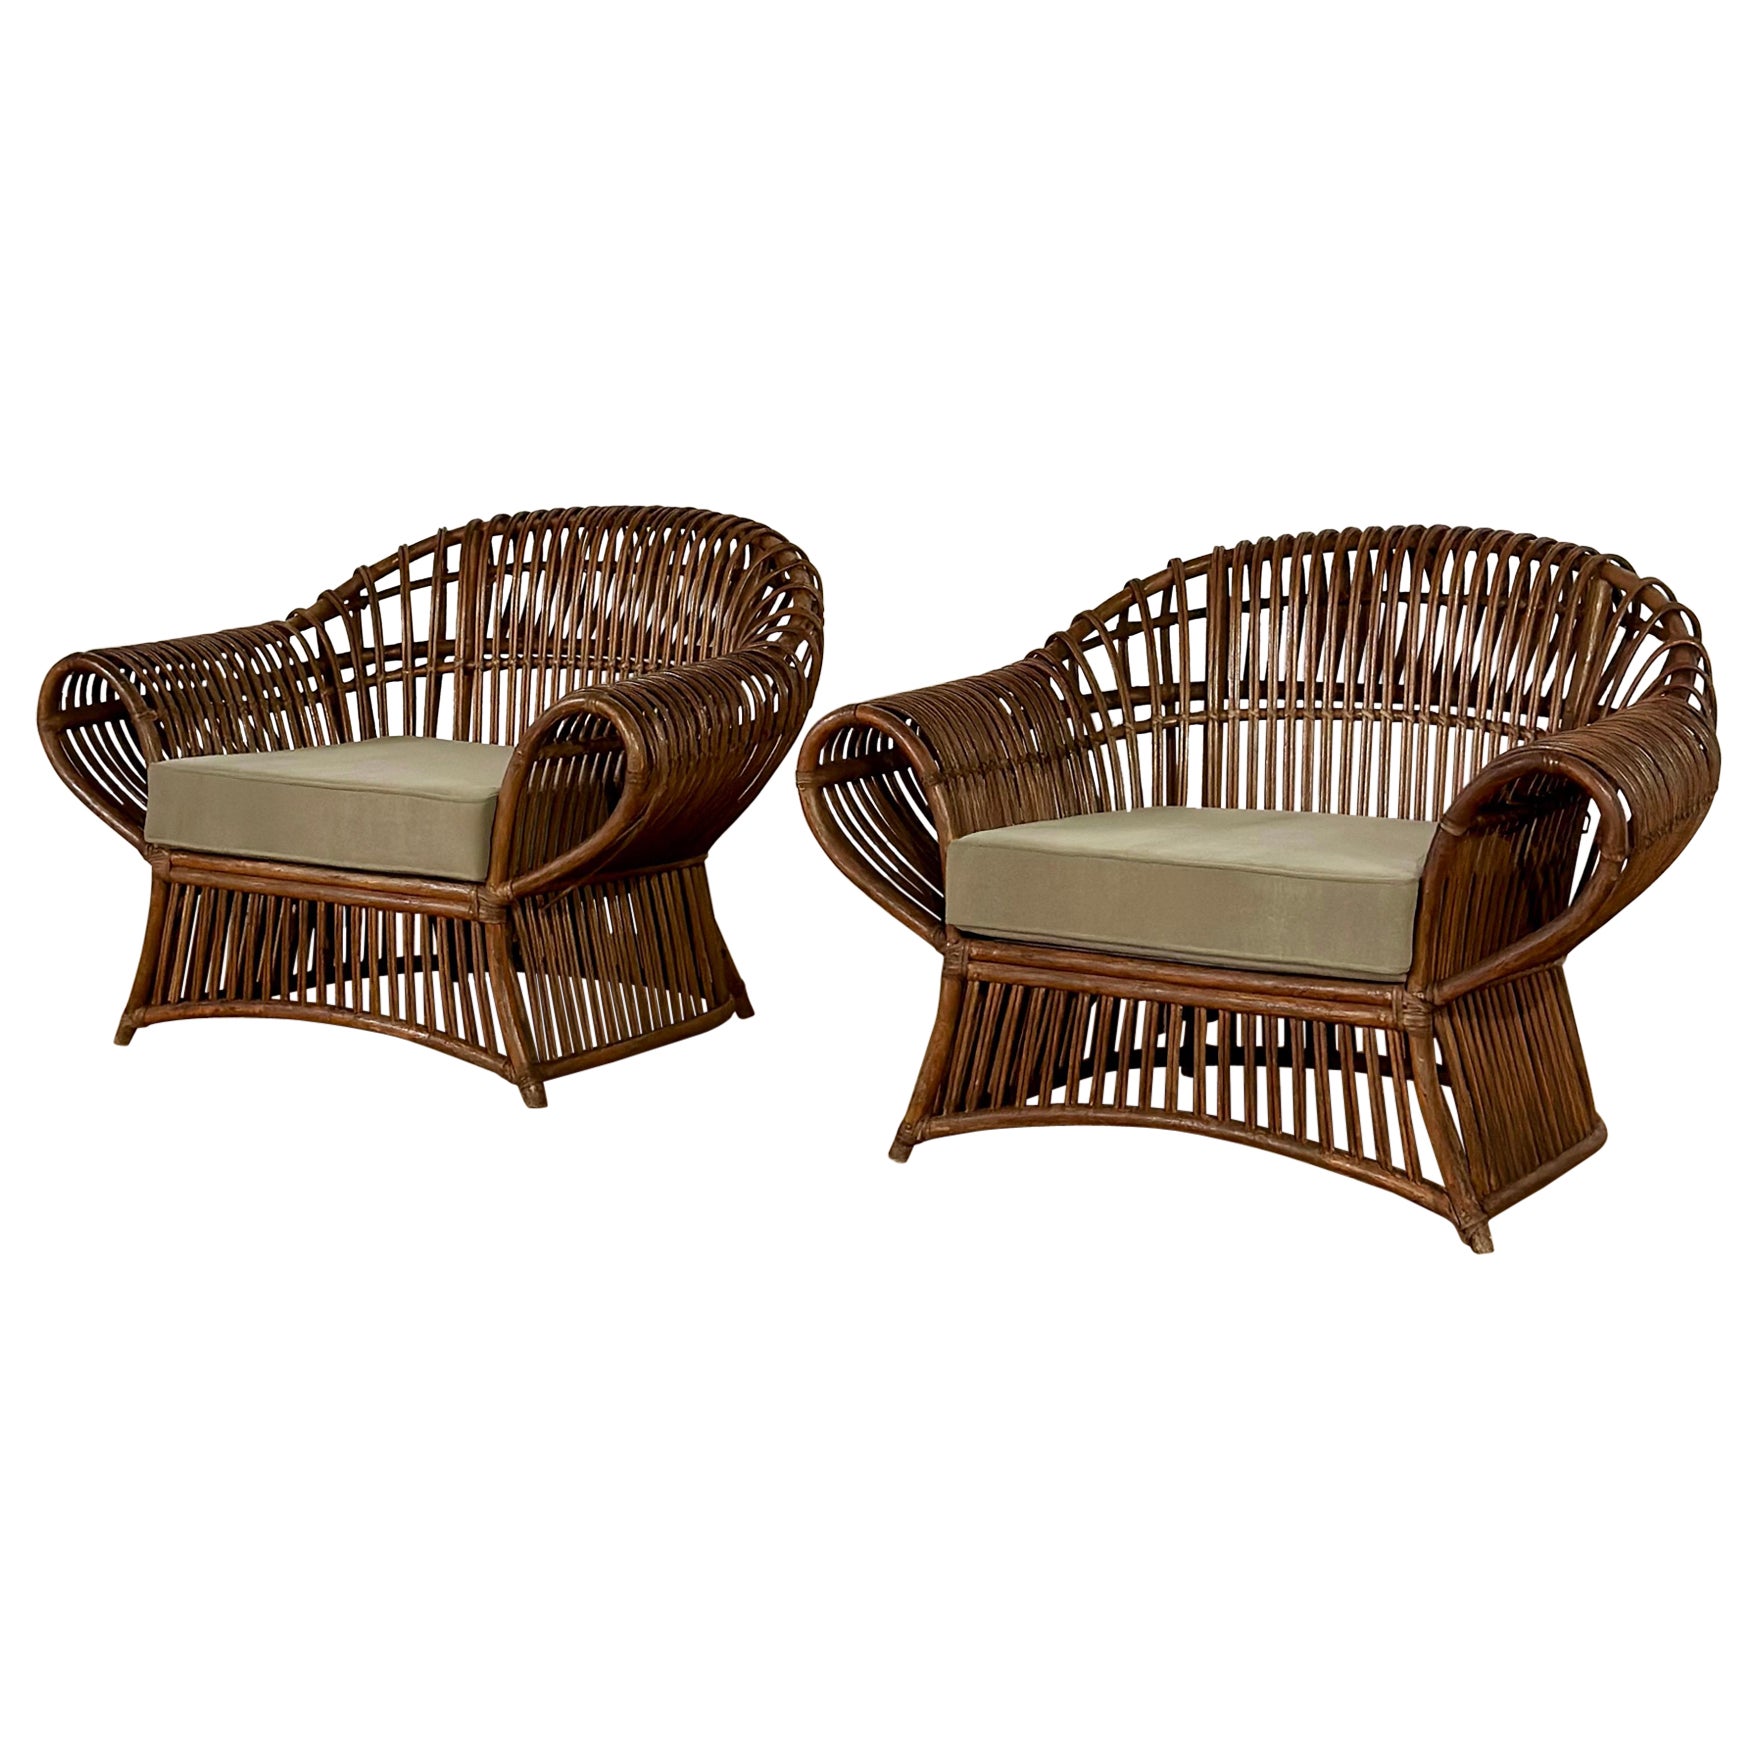 1970s Dark Rattan Bamboo Sculptural Lounge Chairs - a Pair  For Sale